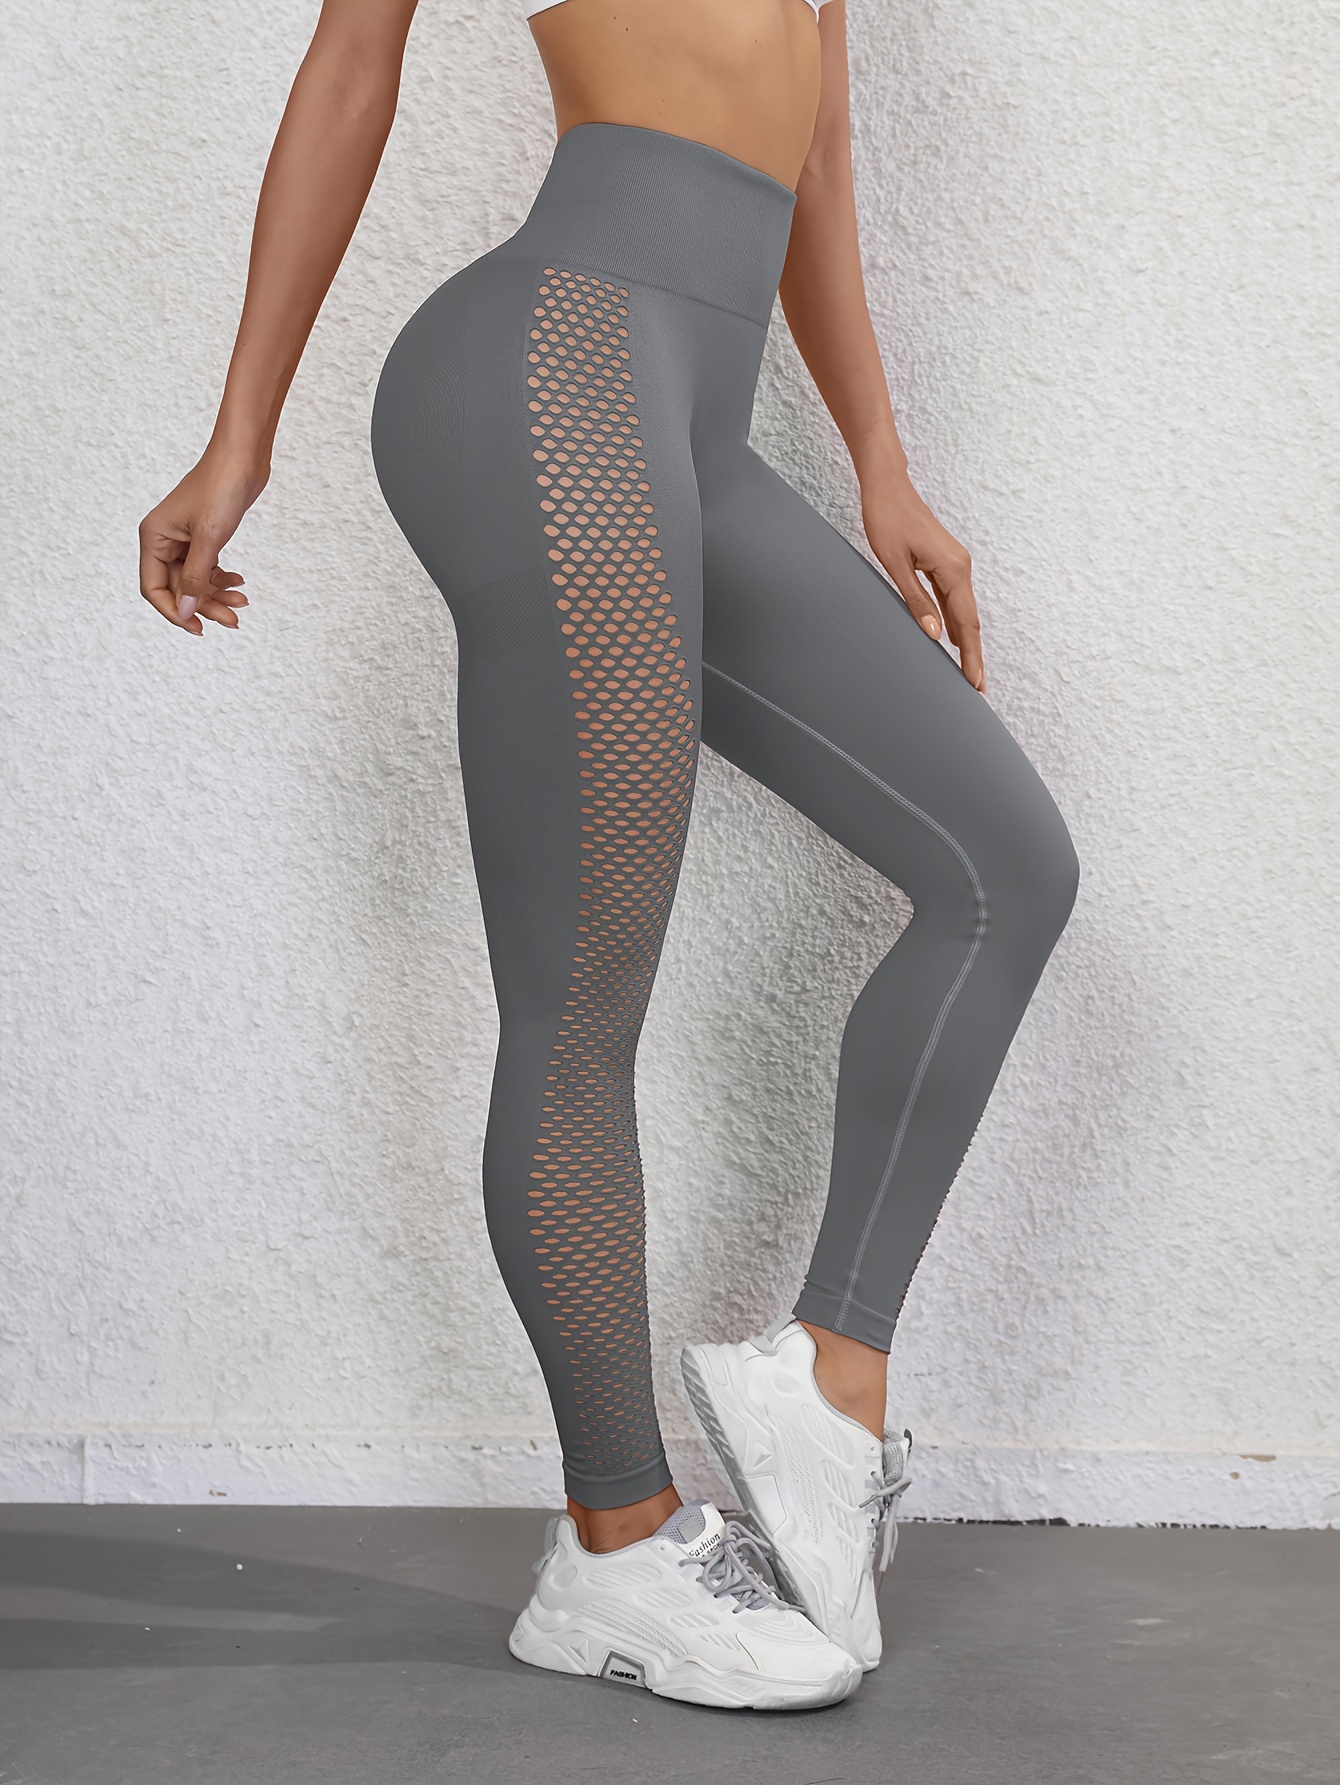 GymX Snake Skin Leggings Ankle Length Stretchable Workout Tights/Sports  Leggings/Sports Fitness Yoga Track Pants for Girls